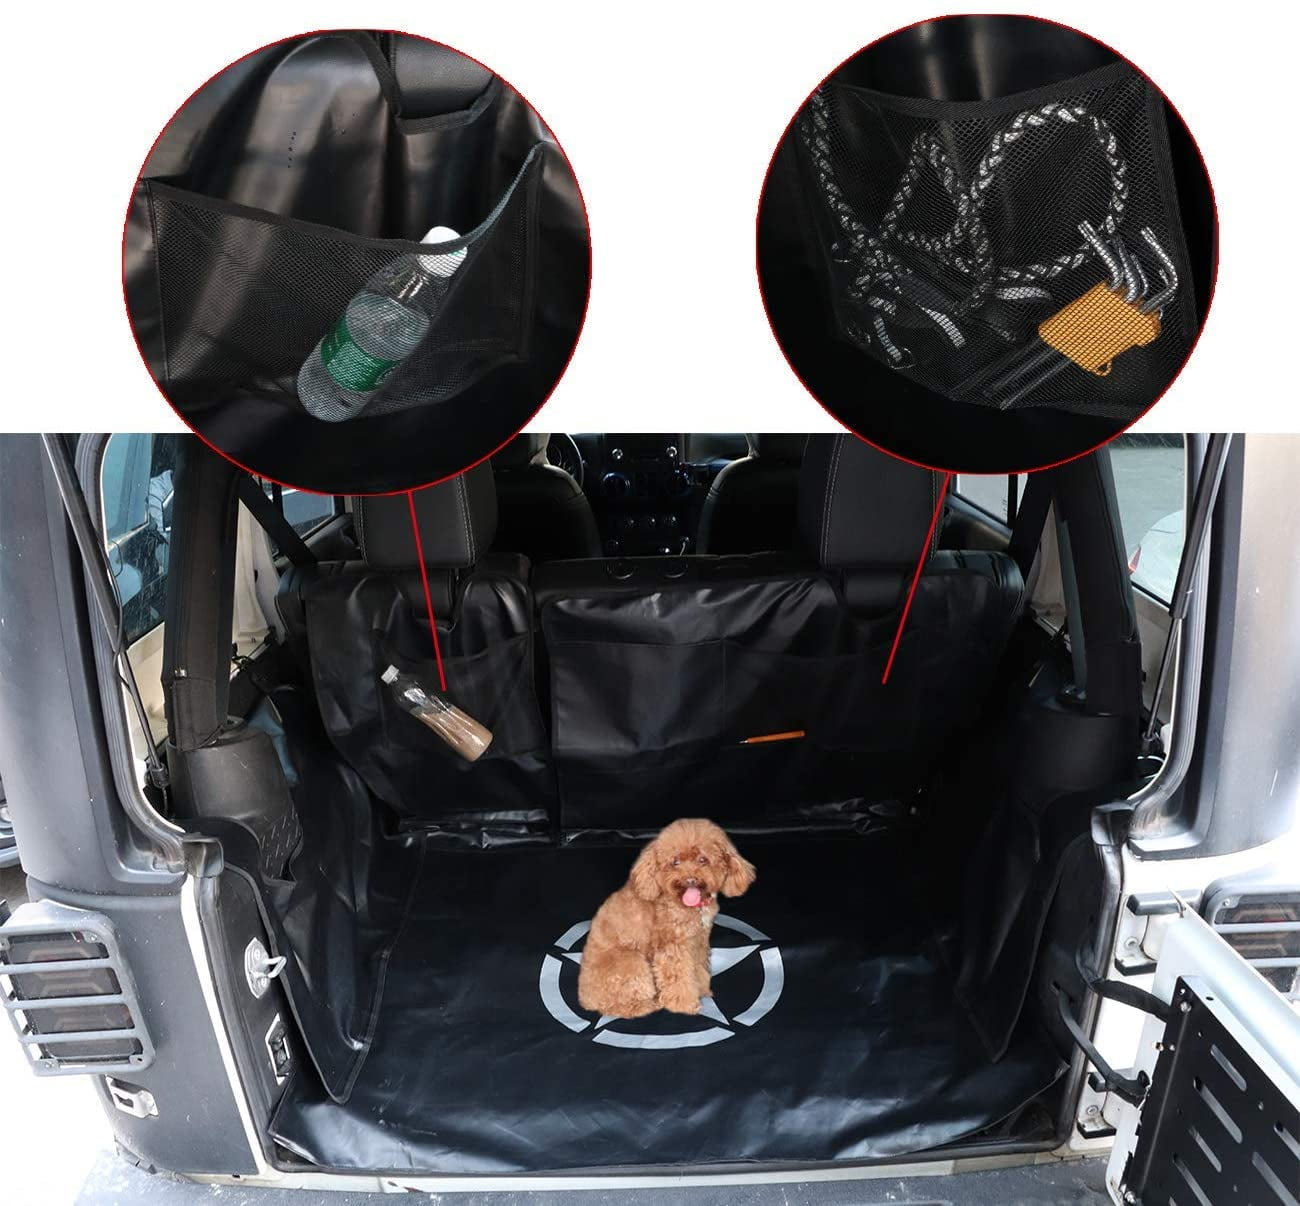 Yoursme Car Rear Seat Cover for Jeep Wrangler 2007-2019 JK&JL 4 Door with Multi-Size Organizer Storage Bags/Trunk Cargo Tool Organizers Holder Pet Dog Barrier